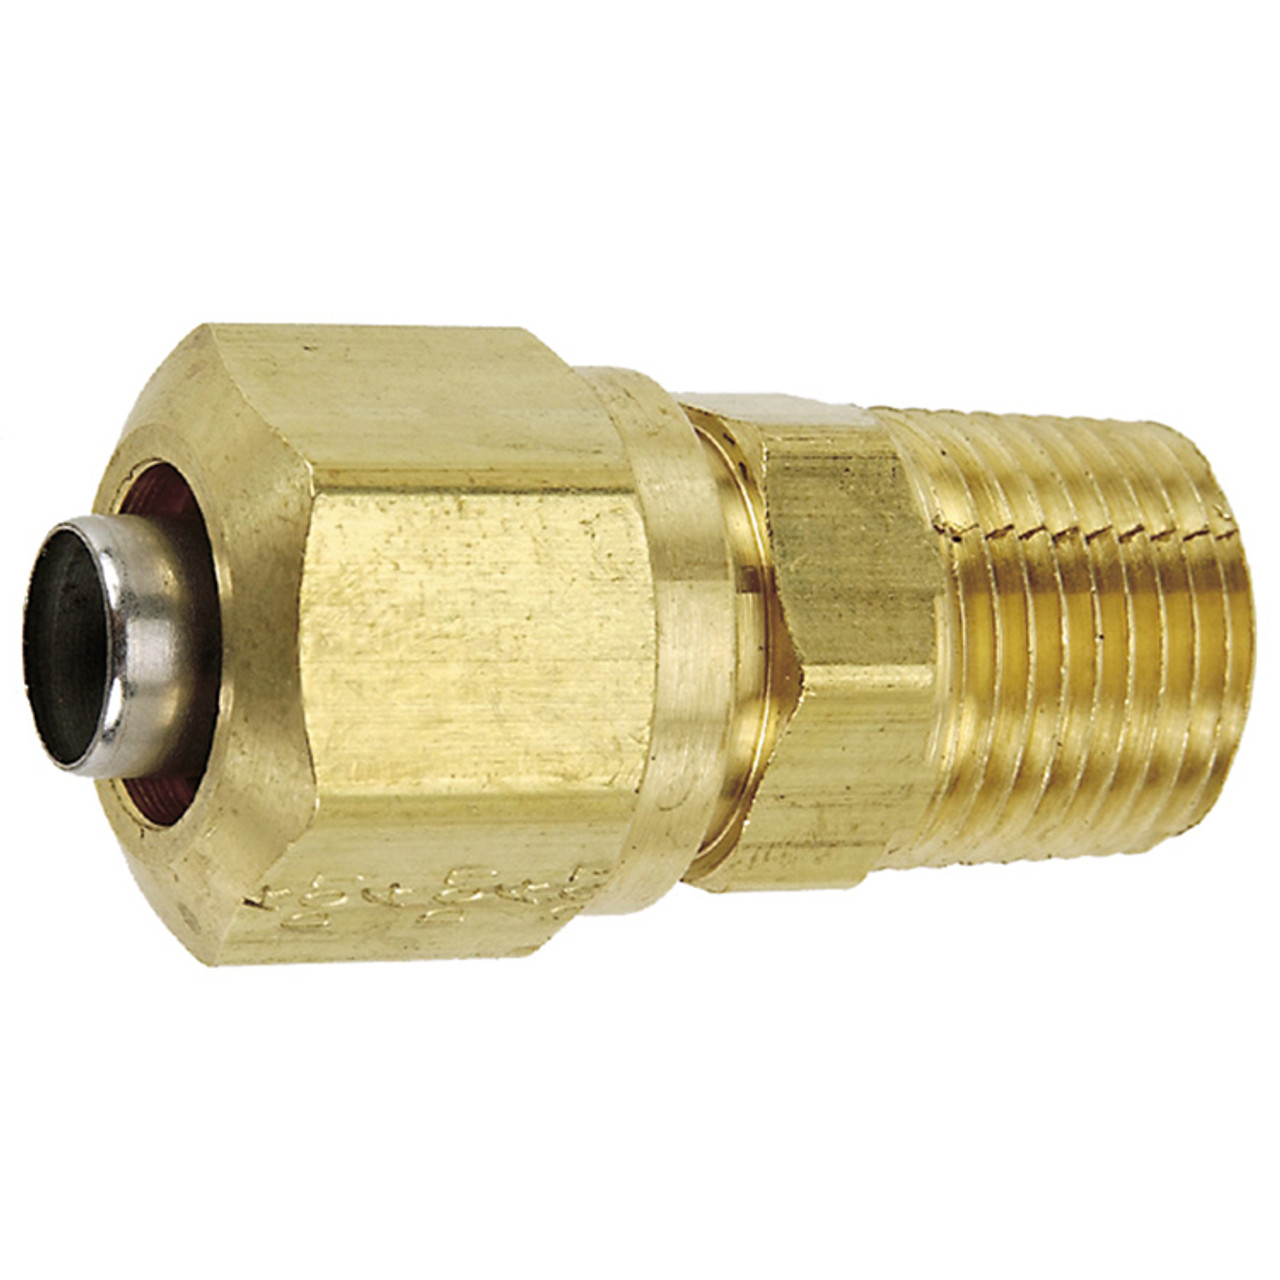 3/8 x 1/4" Brass DOT Male NPT - Compression Connector   G7016-06-04